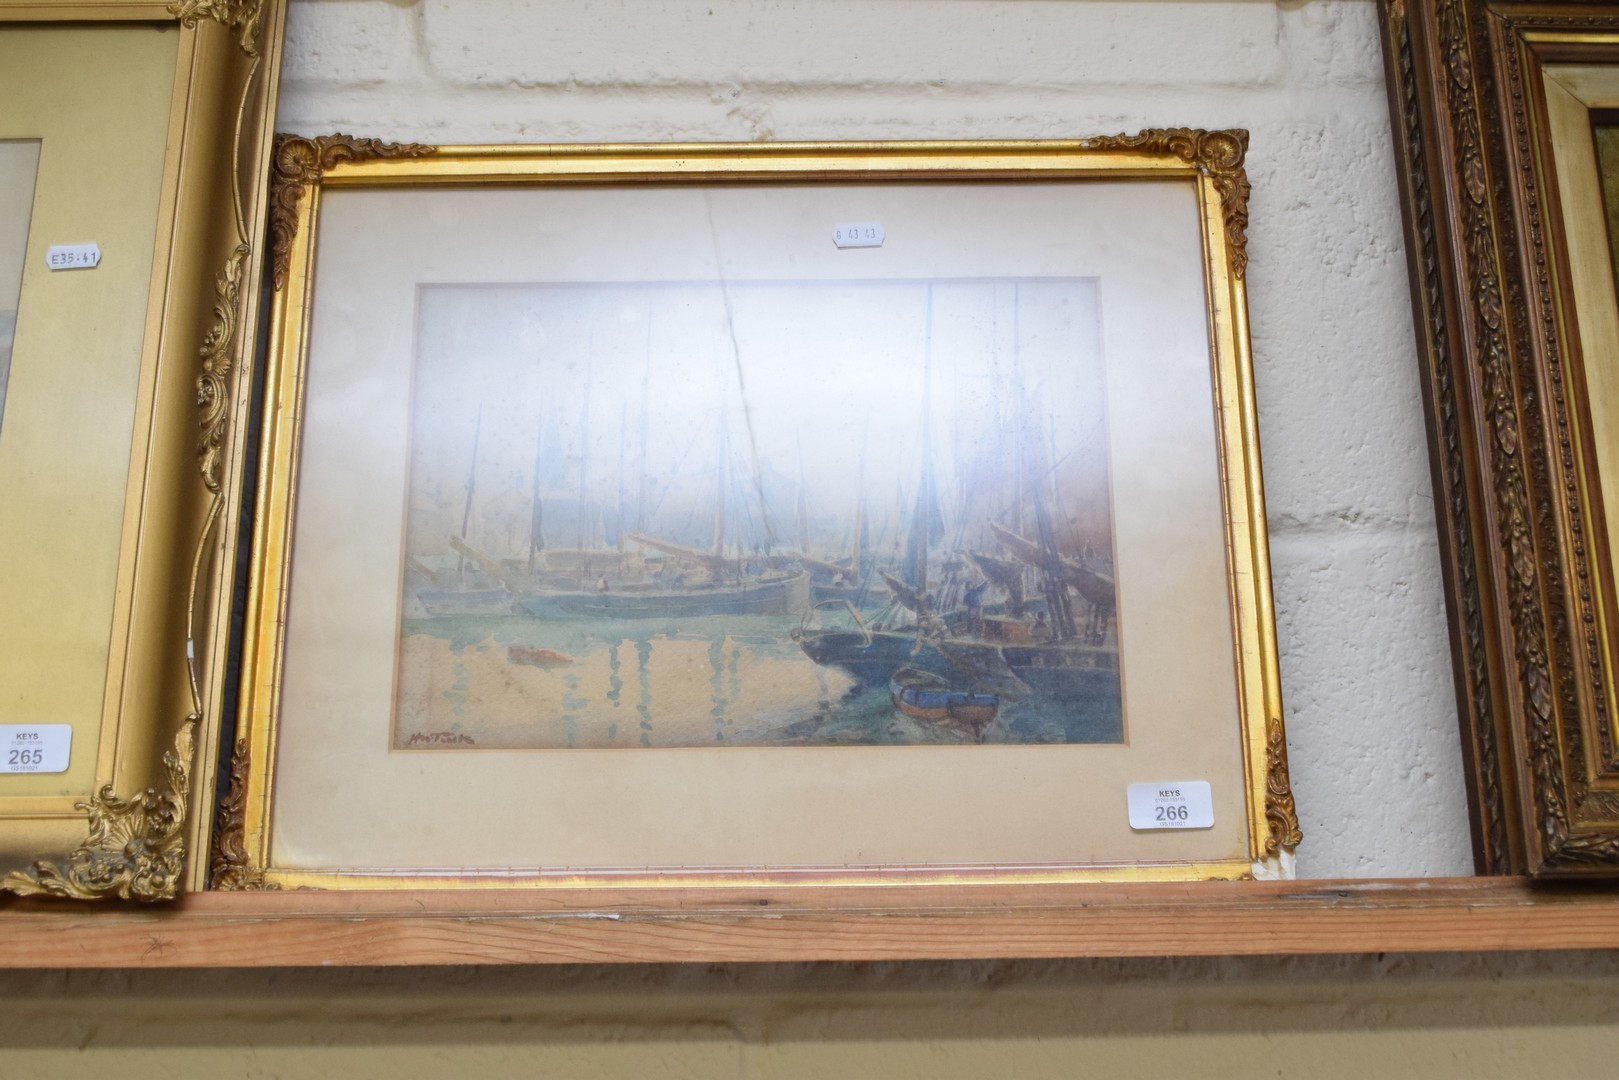 HORACE TUCK, STUDY OF BOATS IN HARBOUR, WATERCOLOUR, GILT FRAMED AND GLAZED, 48CM WIDE